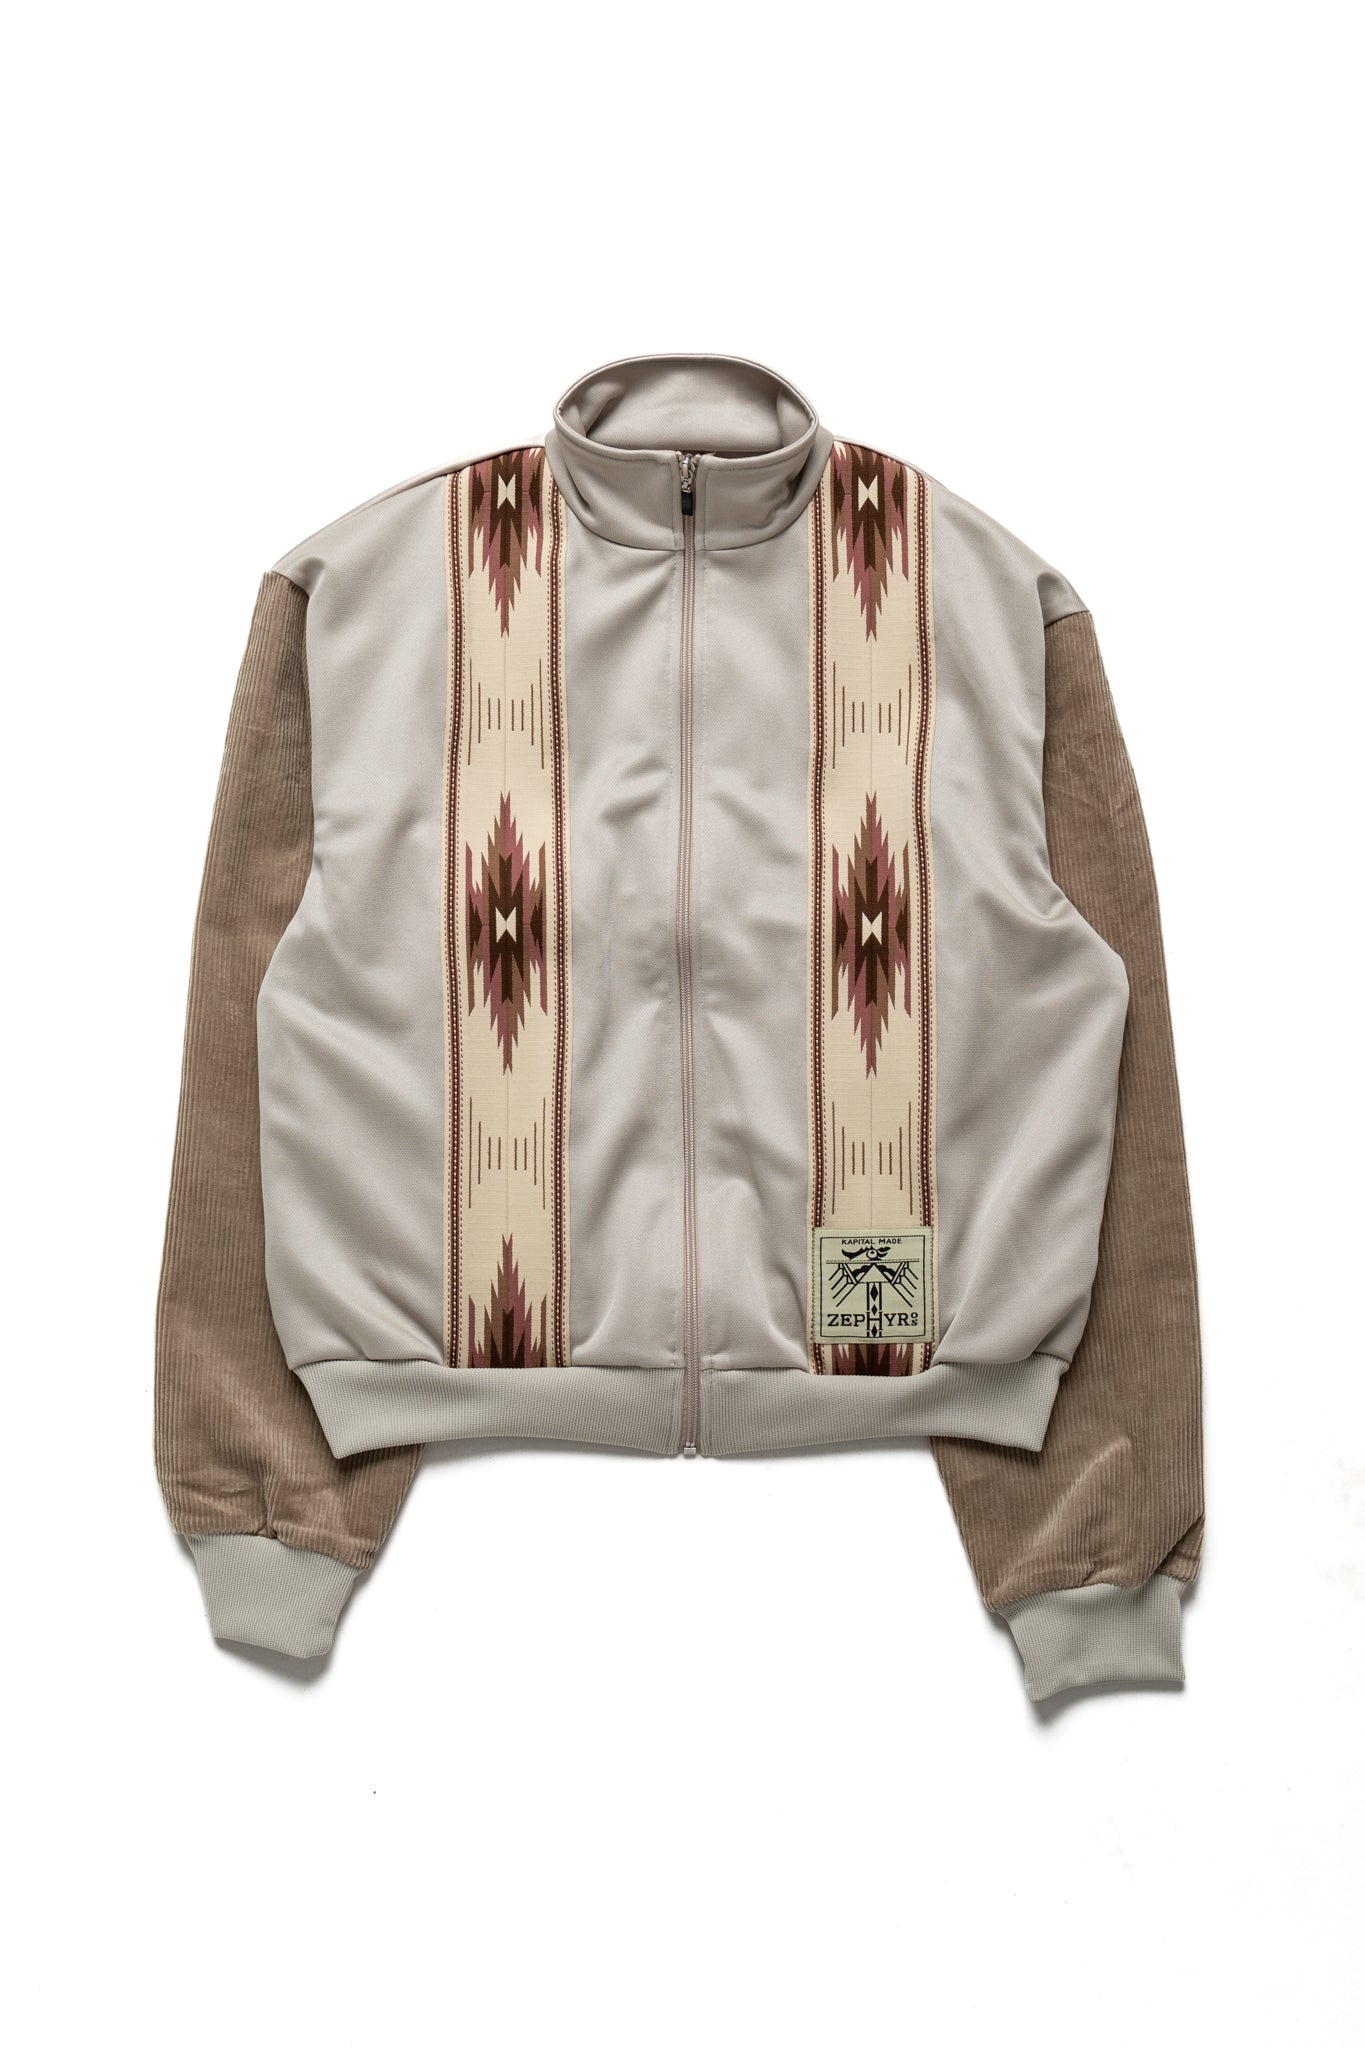 Kapital Beige trucker jacket with an eye -catching Ortega pattern front line. The sleeves are stitched with corduroy fabric in the middle ridge. 100% polyester Sleeve parts: 98% cotton, 2% polyurethane Made in Japan 